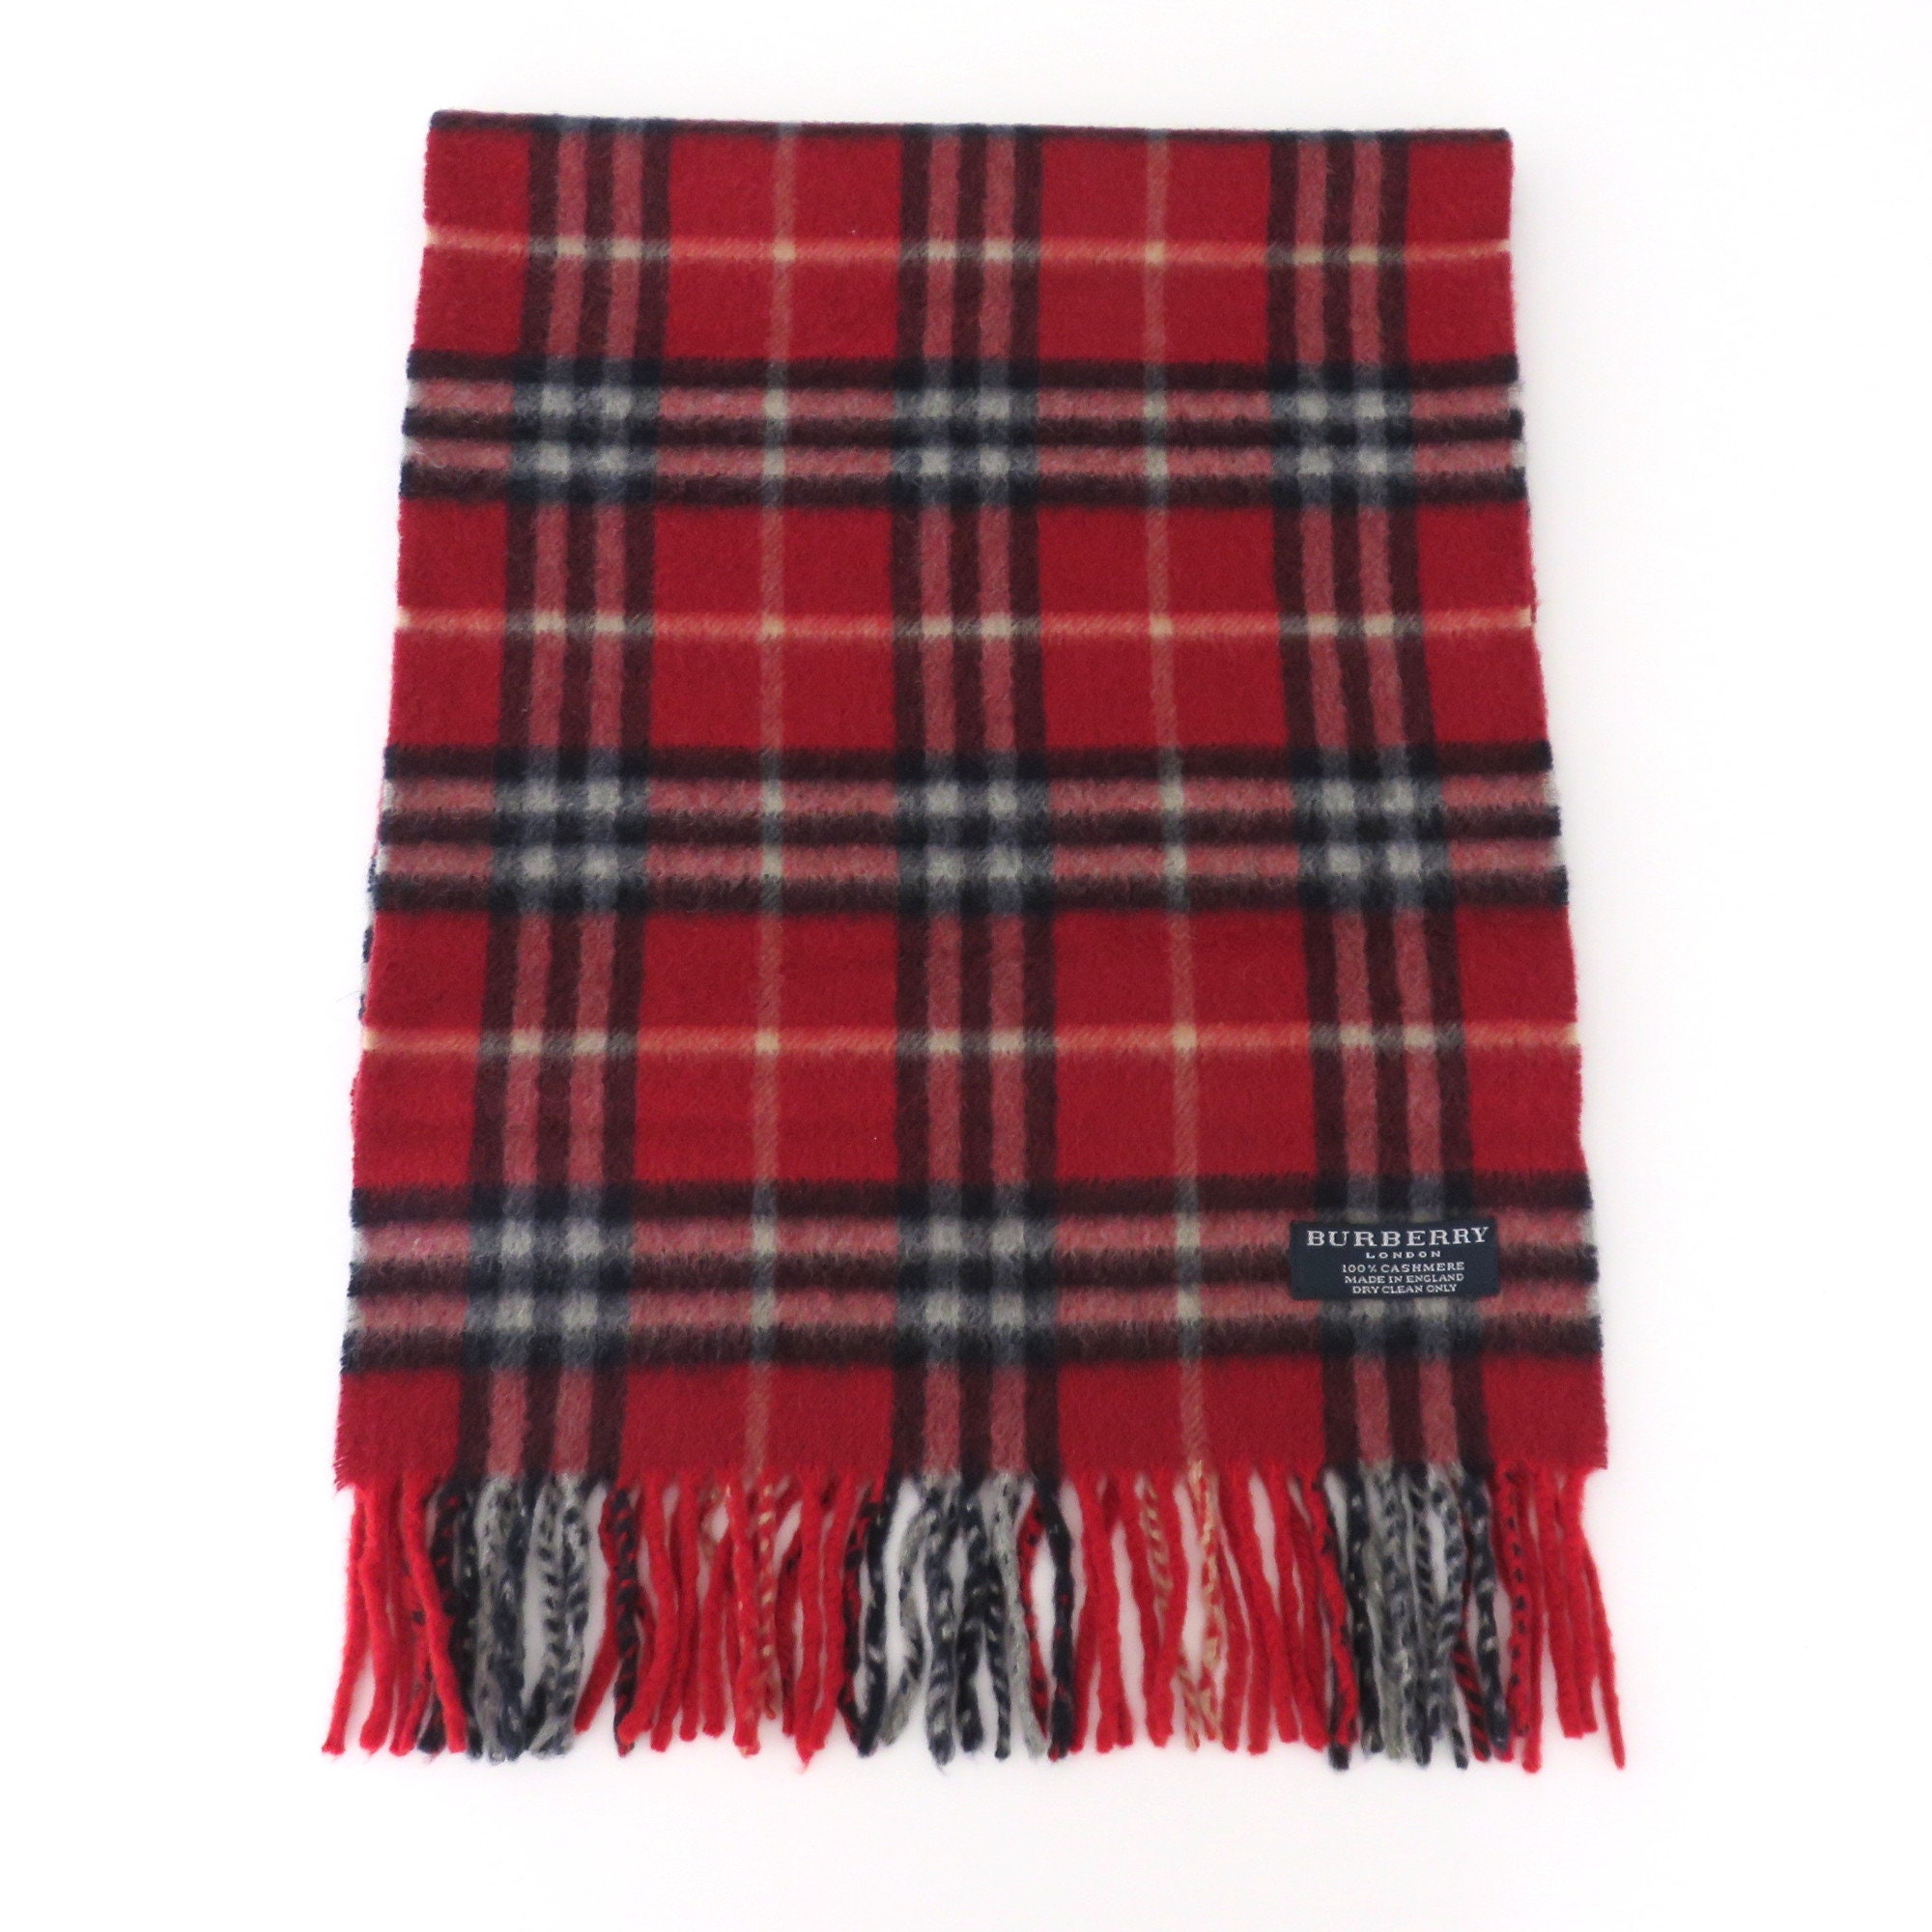 Burberry Red Check Cashmere Scarf - Etsy